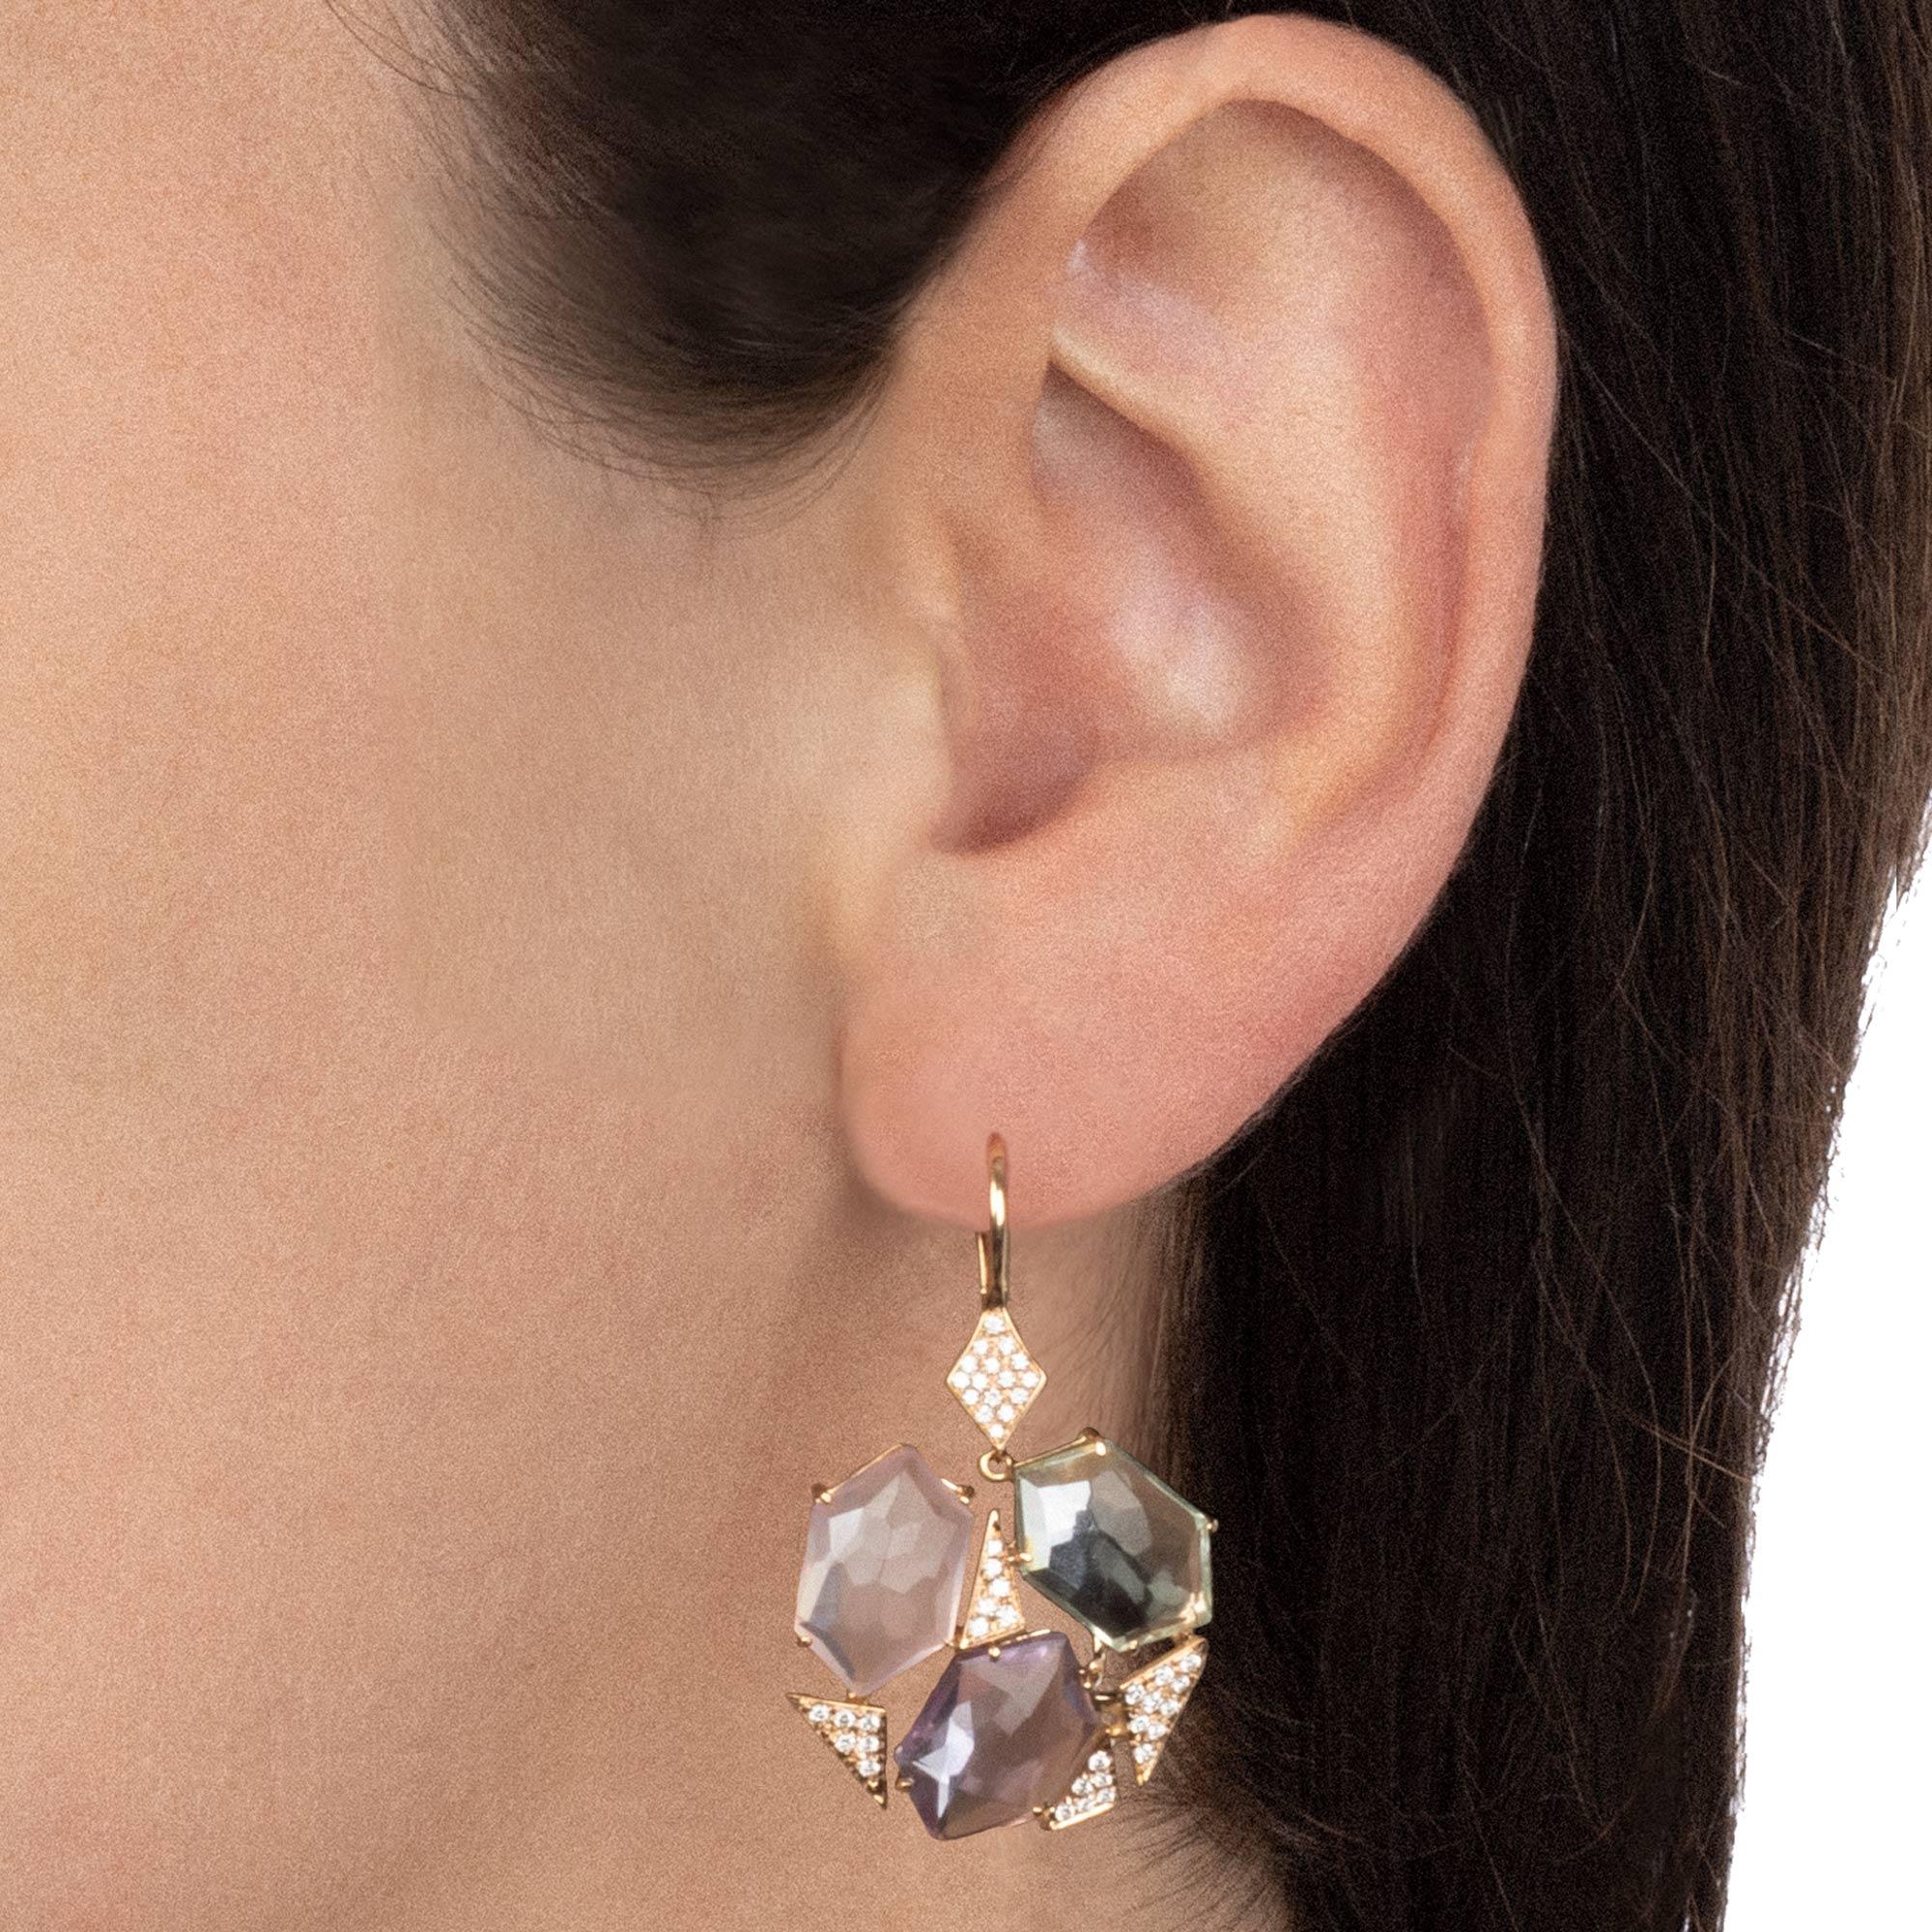 Bright, classy and bold, this earrings are all you need to jazz-up a minimal outfit or add a touch of exclusiveness to your look. The brightness of the gemstones blends with the warm tone of rose gold while the small diamonds add some classy